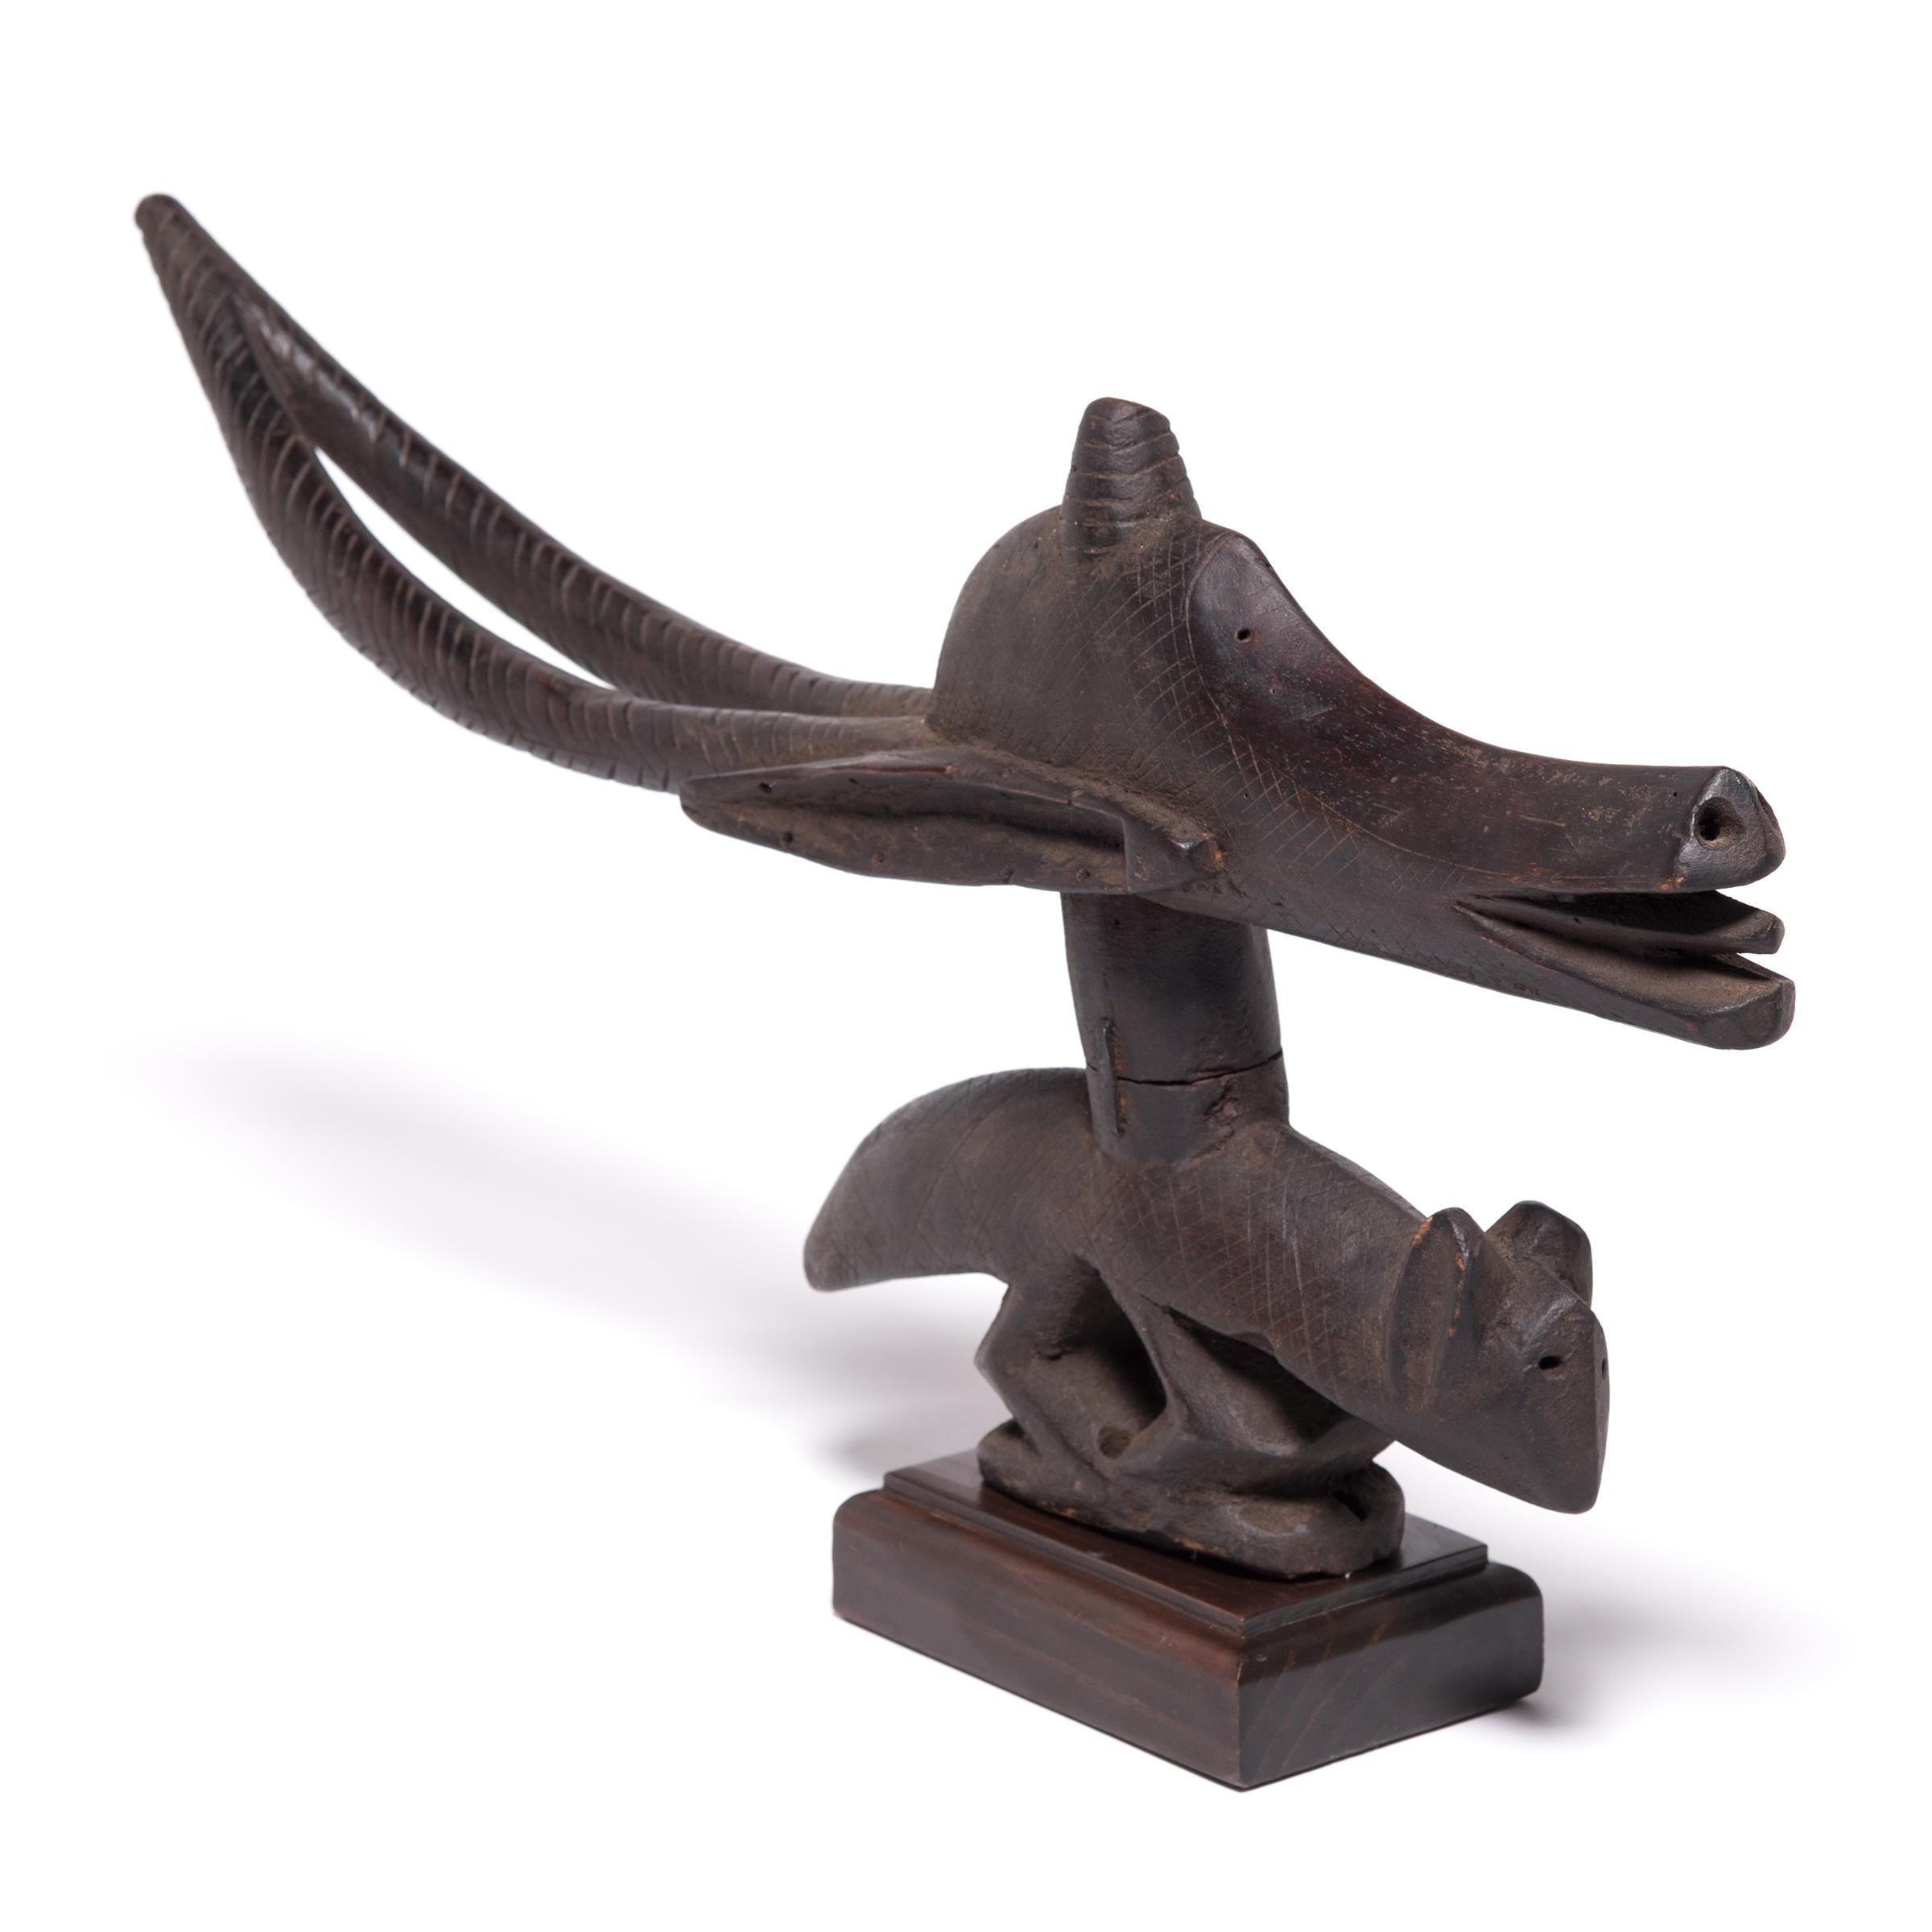 Carved to honor the mythical being Ci Wara, a Bambara deity that’s half mortal and half animal, this wooden headdress combines the graceful head and horns of an antelope with the compact body of an anteater. Credited with the discovery of